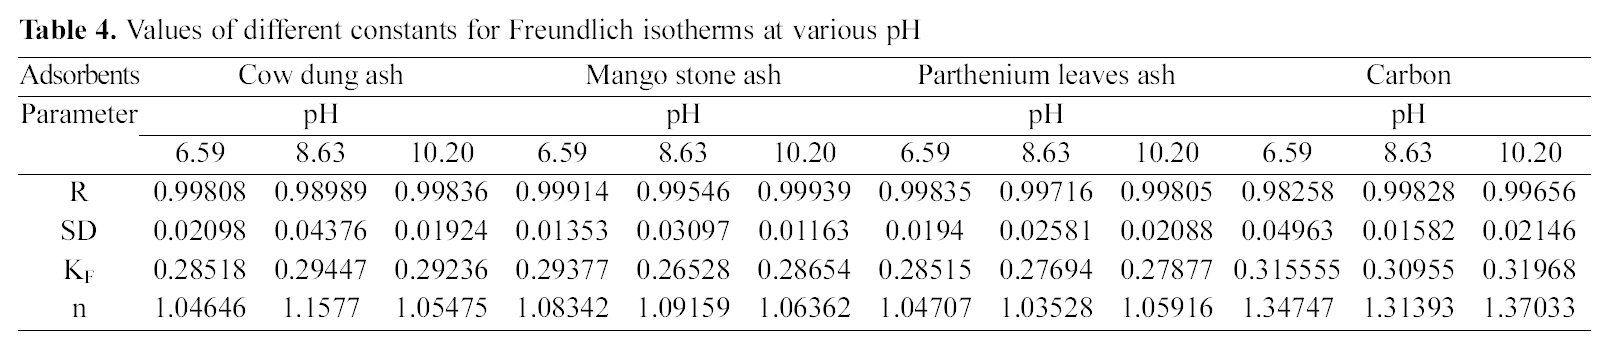 Values of different constants for Freundlich isotherms at various pH